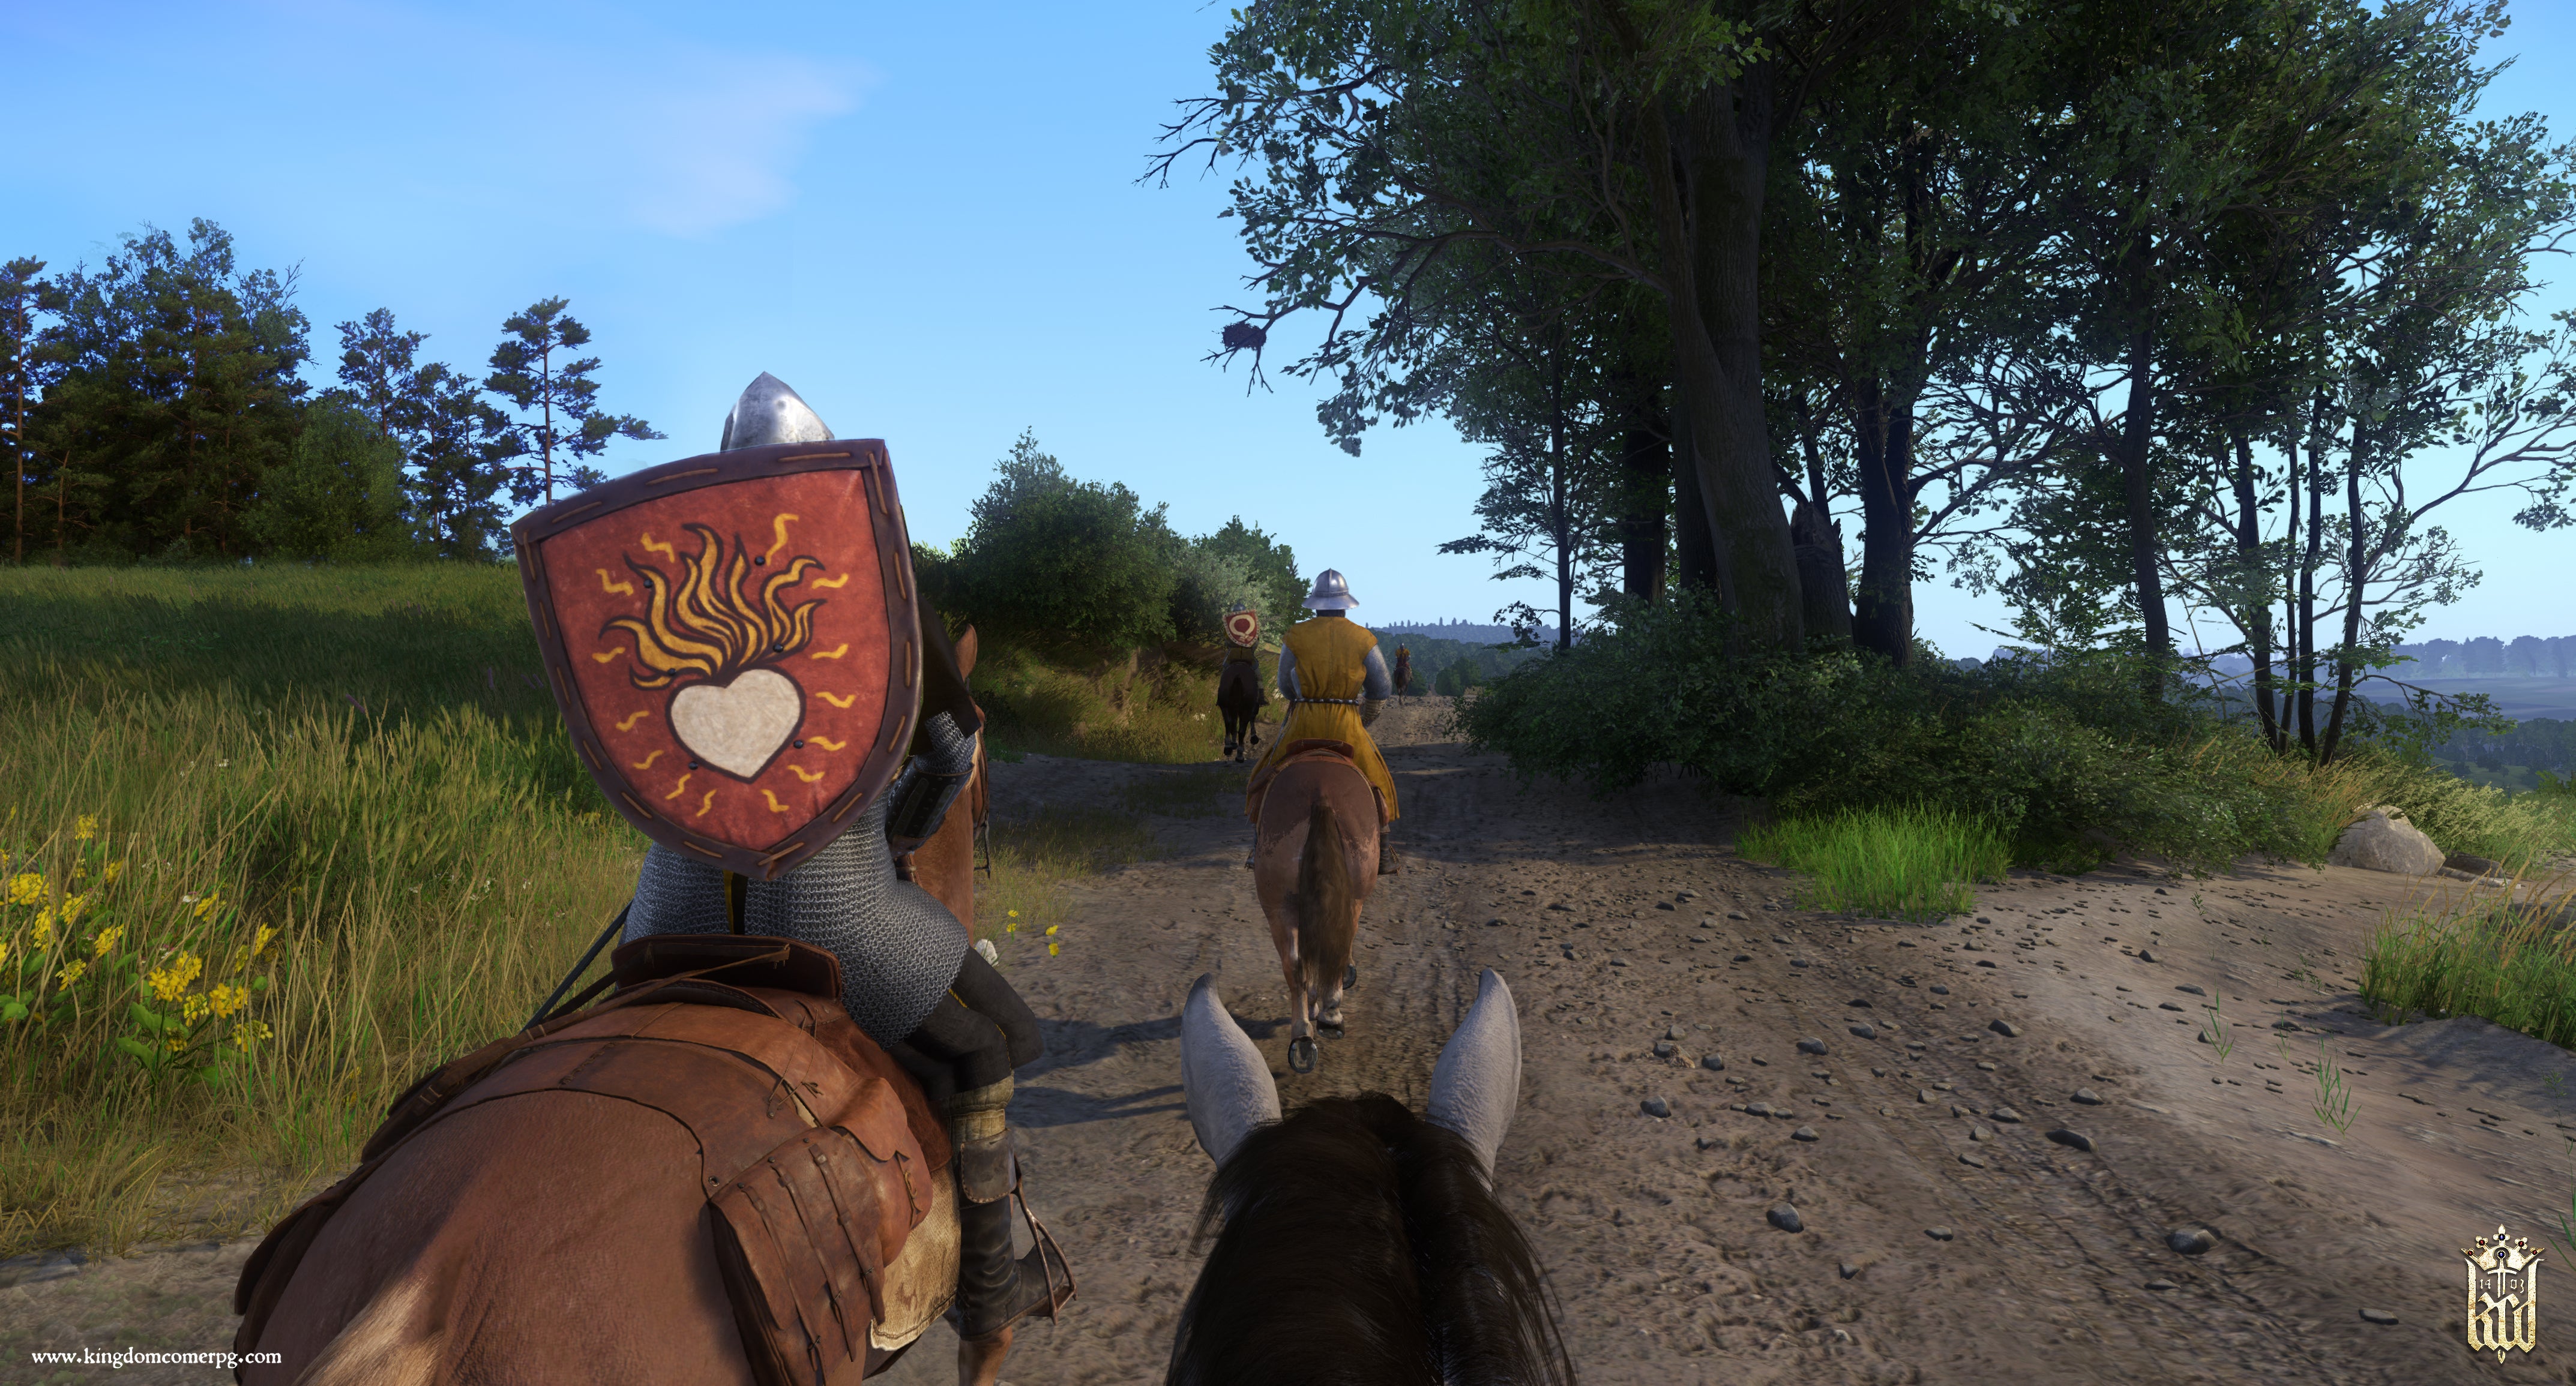 Image for Kingdom Come: Deliverance The Good Thief side quest guide - Where to find a spade and how to sell stolen items